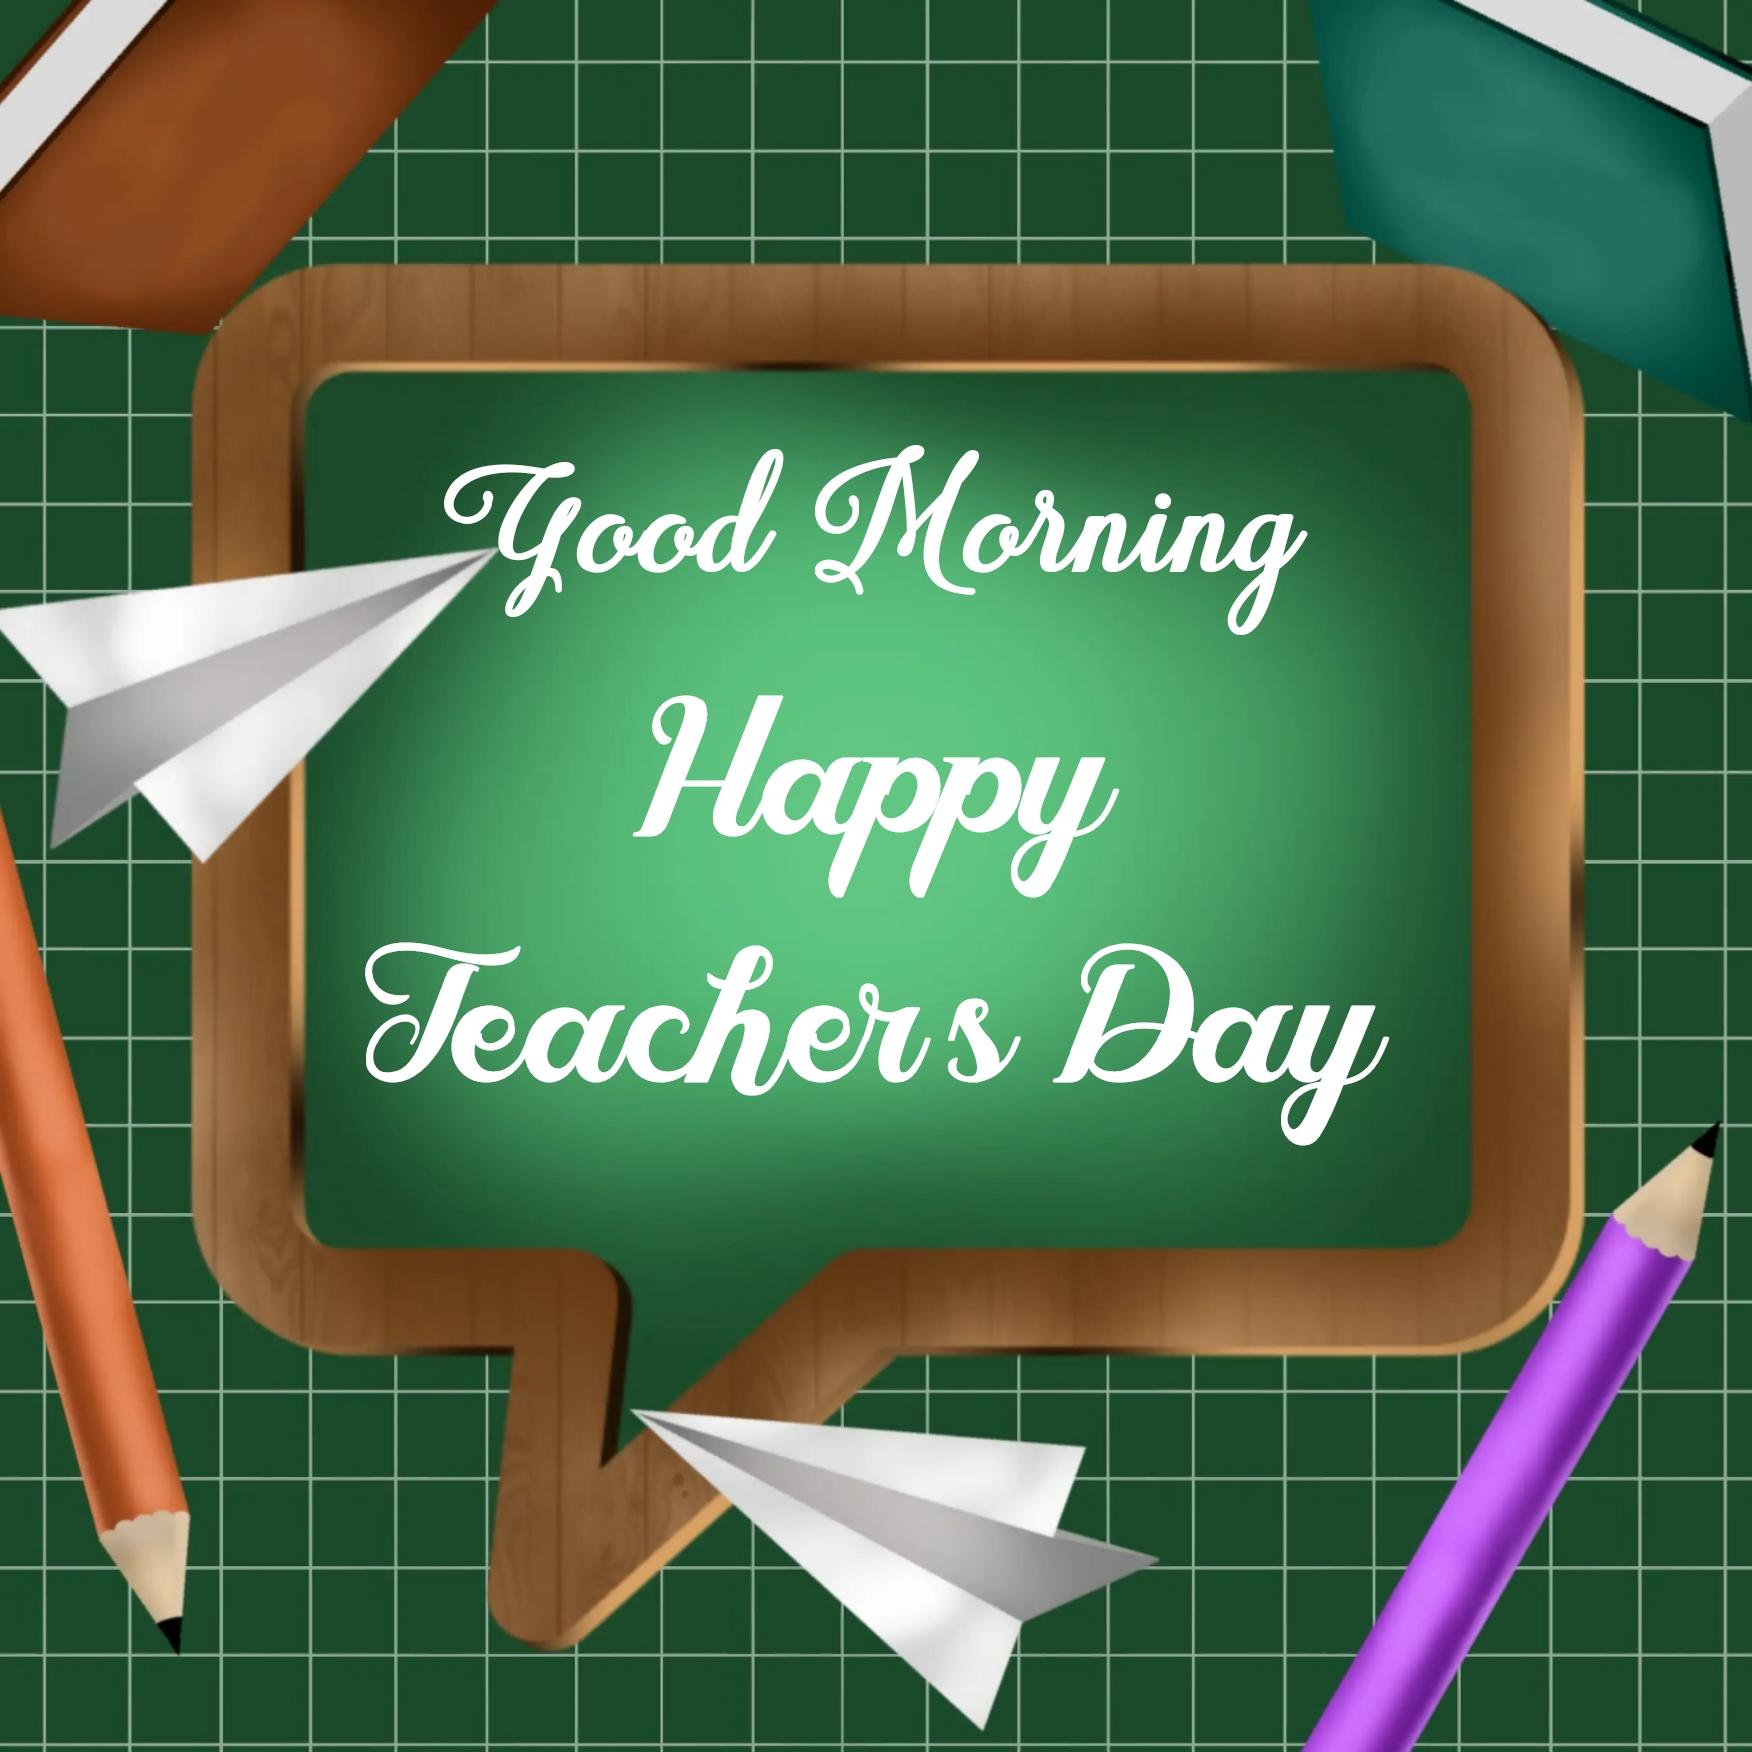 Good Morning Happy Teachers Day Images